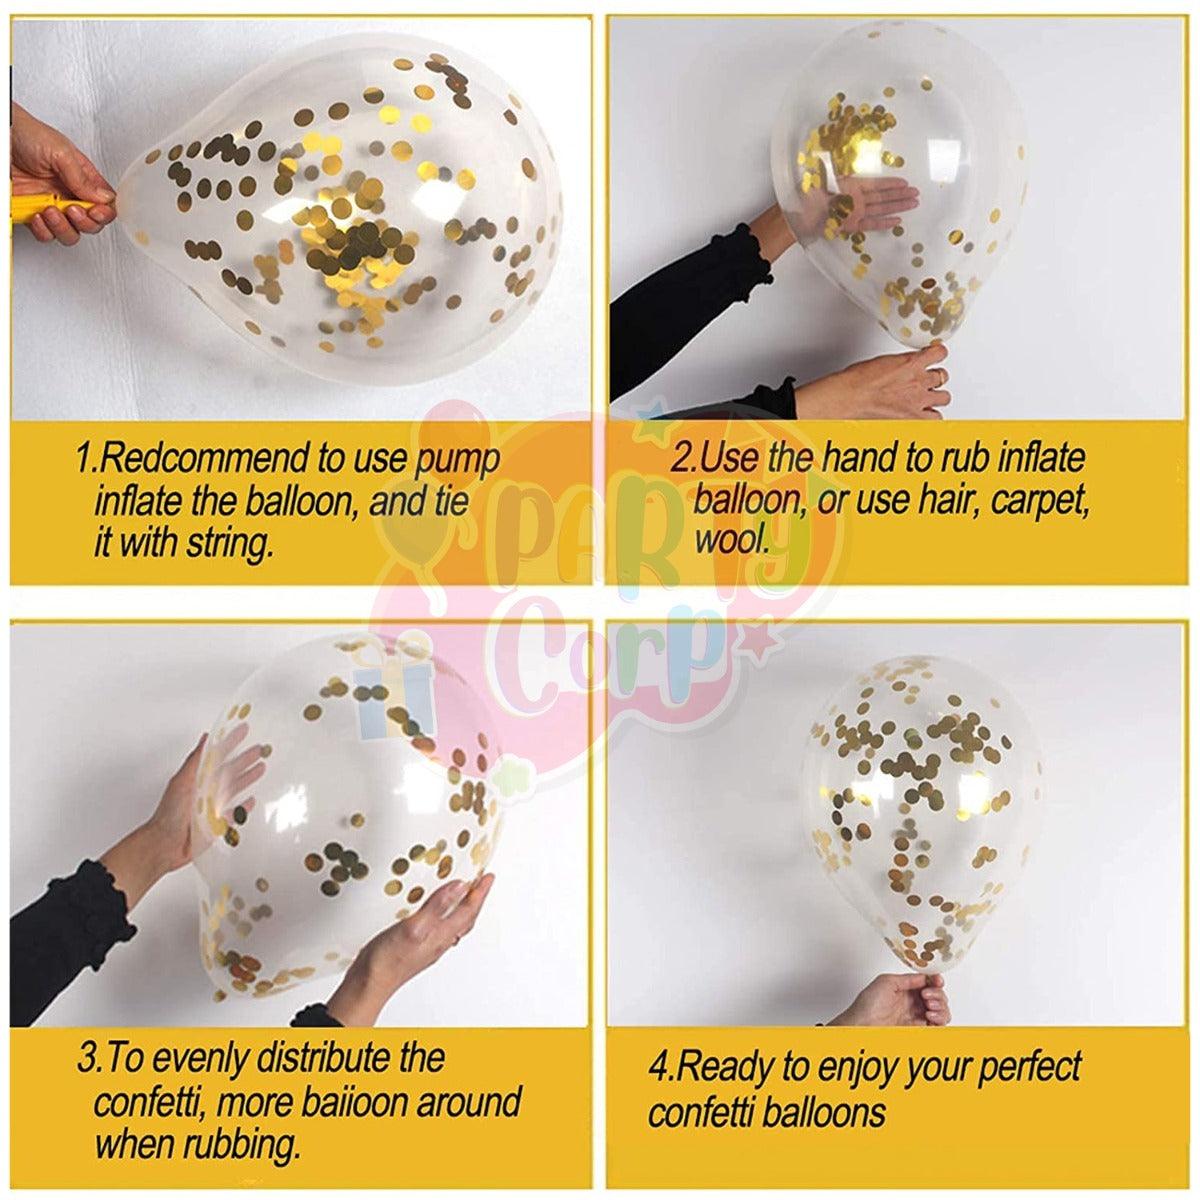 PartyCorp New Year Decoration Kit Combo 49 Pcs - Gold, Rose Gold, White, Gold Confetti Chrome Balloon, Gold HNY Banner, Silver Curtain, Gold Tassels, (Gold Star,2022 Digit,Wine,Champagne Bottle) Foils